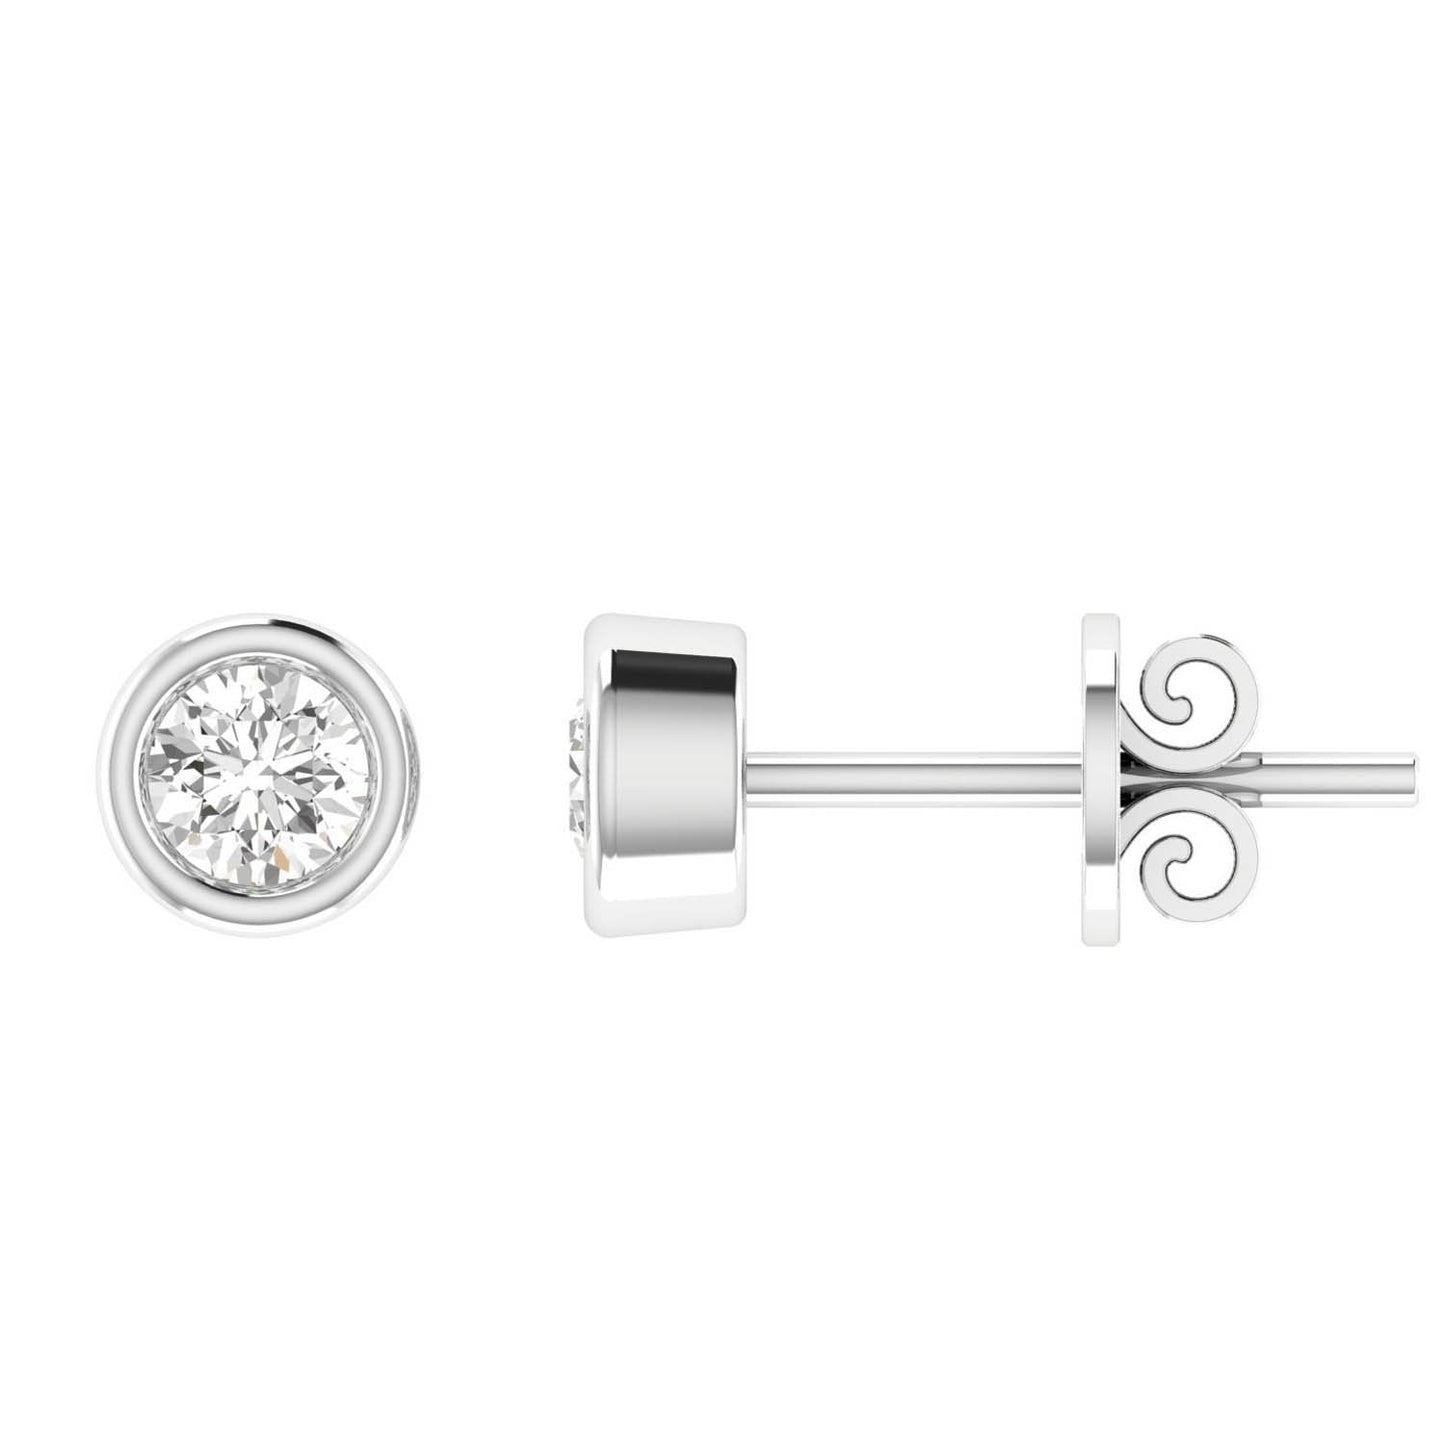 Diamond Stud Earrings with 0.10ct Diamonds in 9K White Gold - 9WBE10